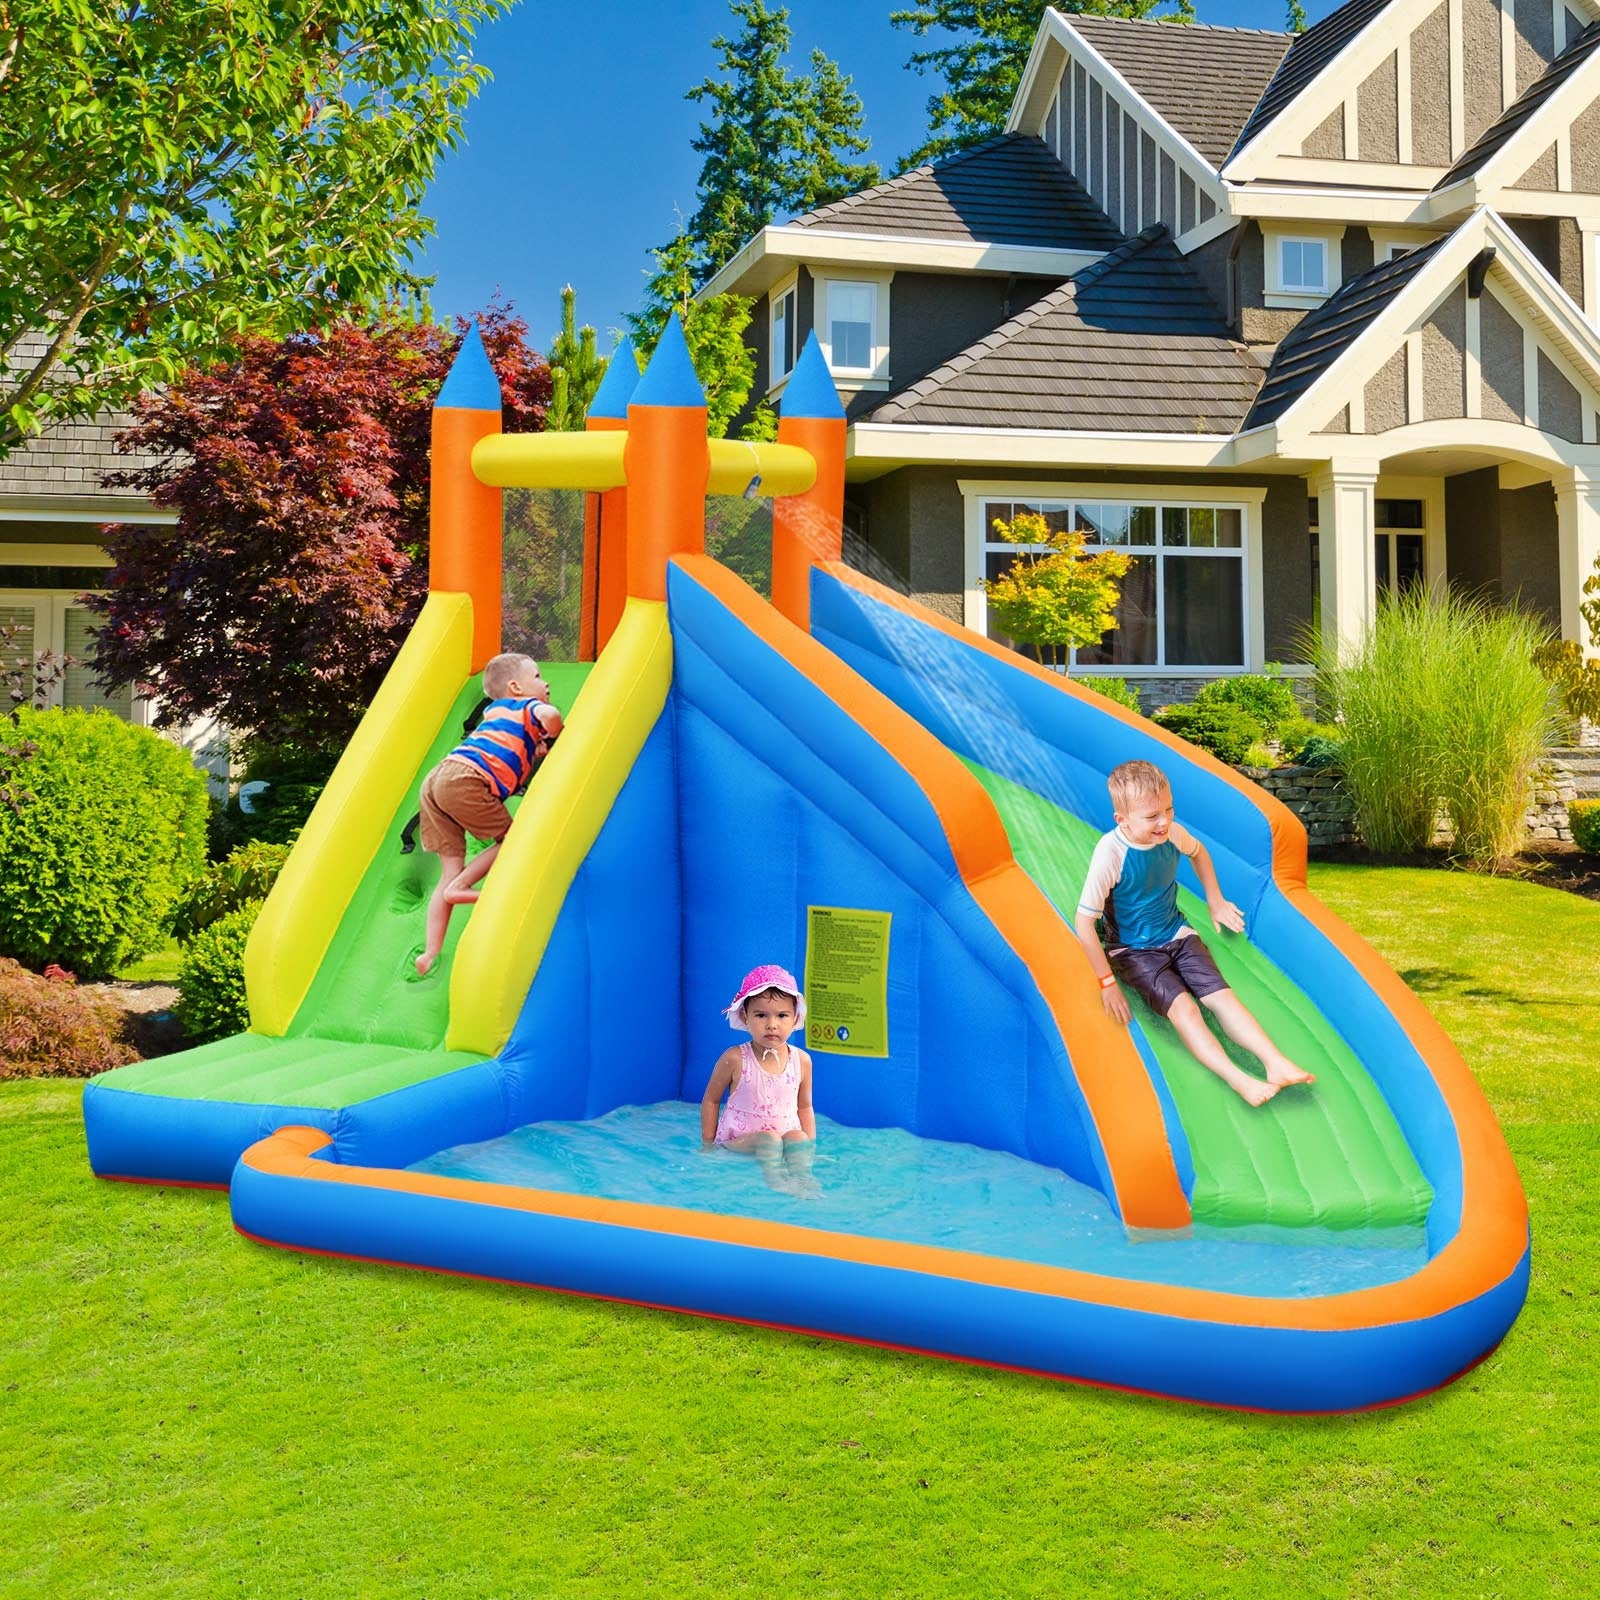 Premium materials: Our inflatable water slide boasts a climbing wall, curved slide, and spacious wading pool area. It is constructed with exceptionally durable 420d puncture-proof Oxford materials, while the bouncing area is reinforced with exclusive 840d Oxford fabric for unmatched strength and longevity. Designed for 2-3 kids to enjoy together.